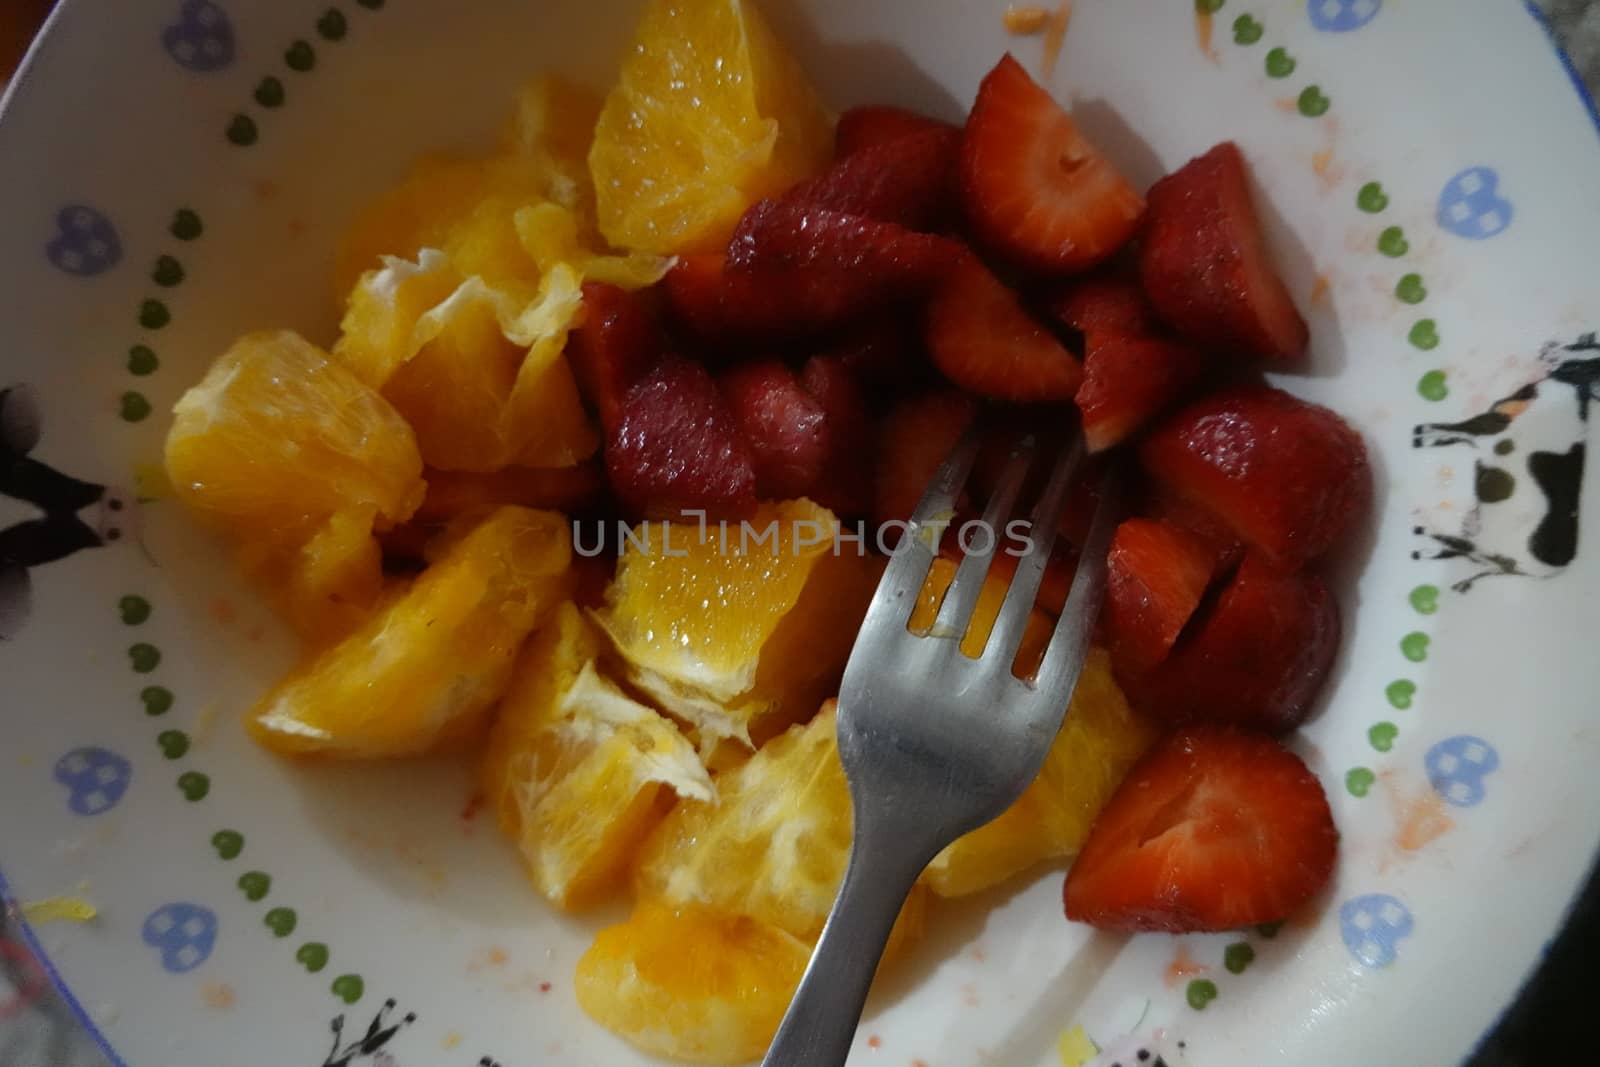 a healthy breakfast of fruits. High quality Photo by devoxer